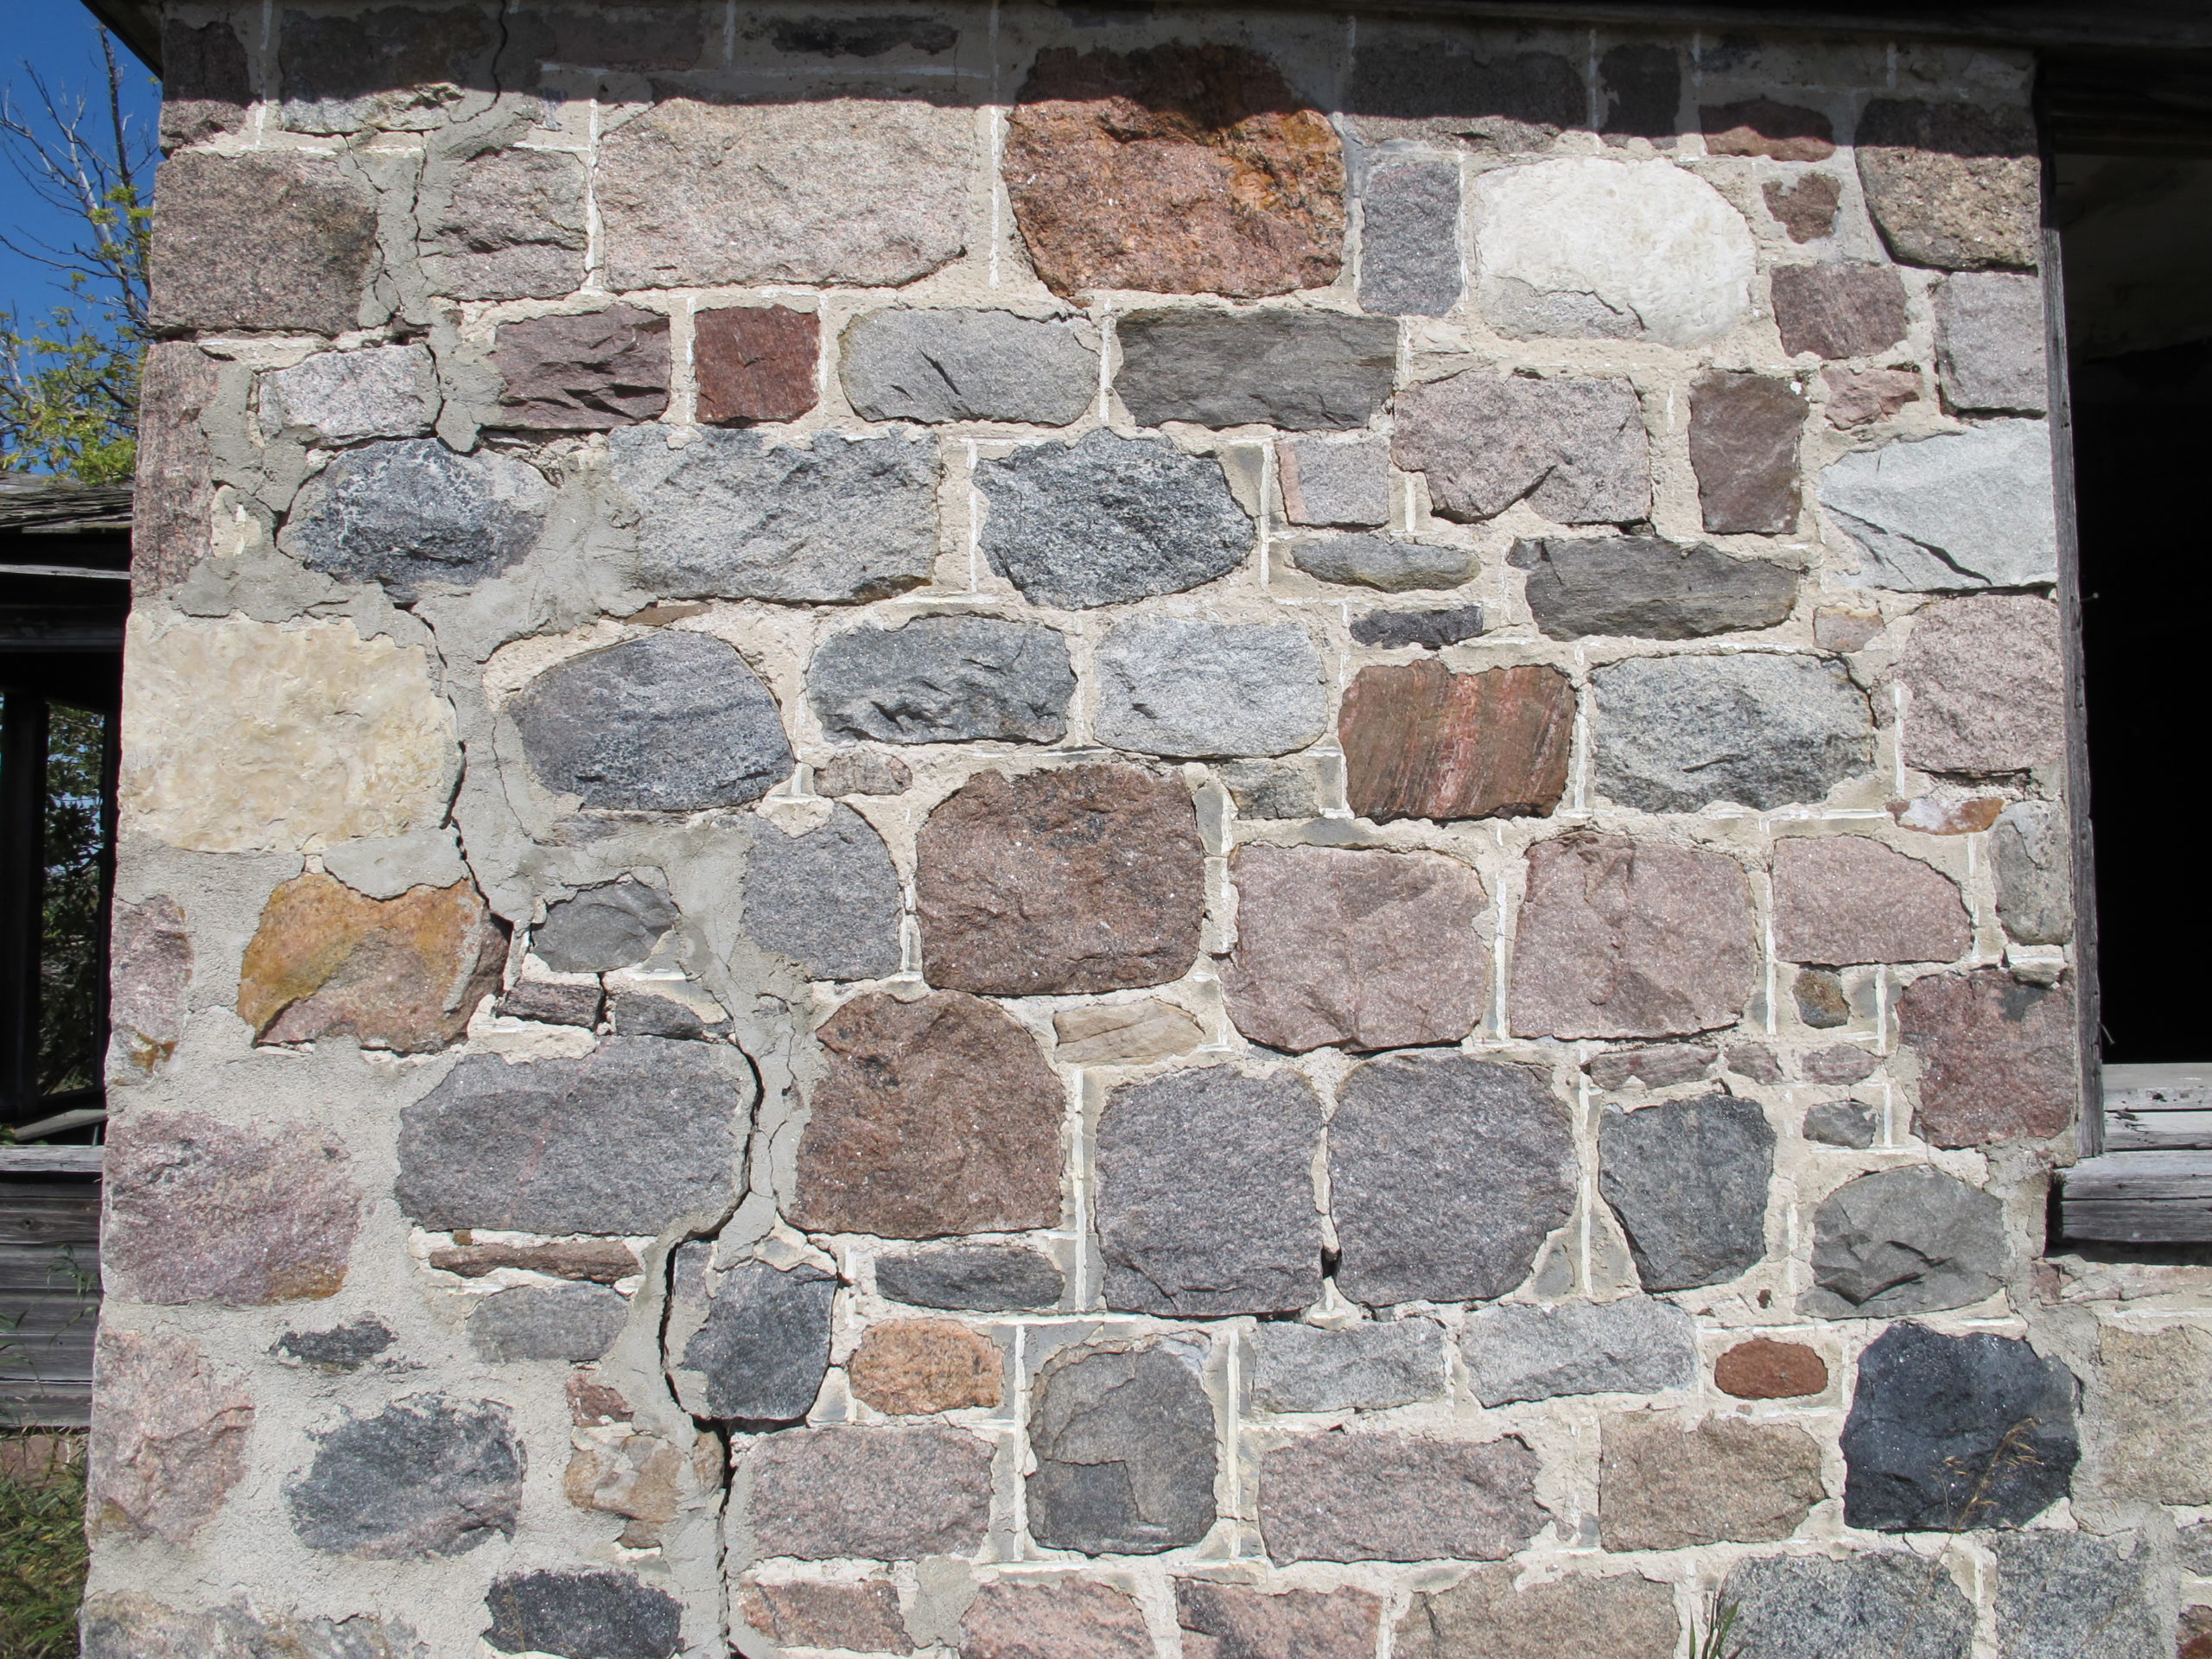 A close-up of a stone wall with stone blocks of varying shades of grey and brownish-red.